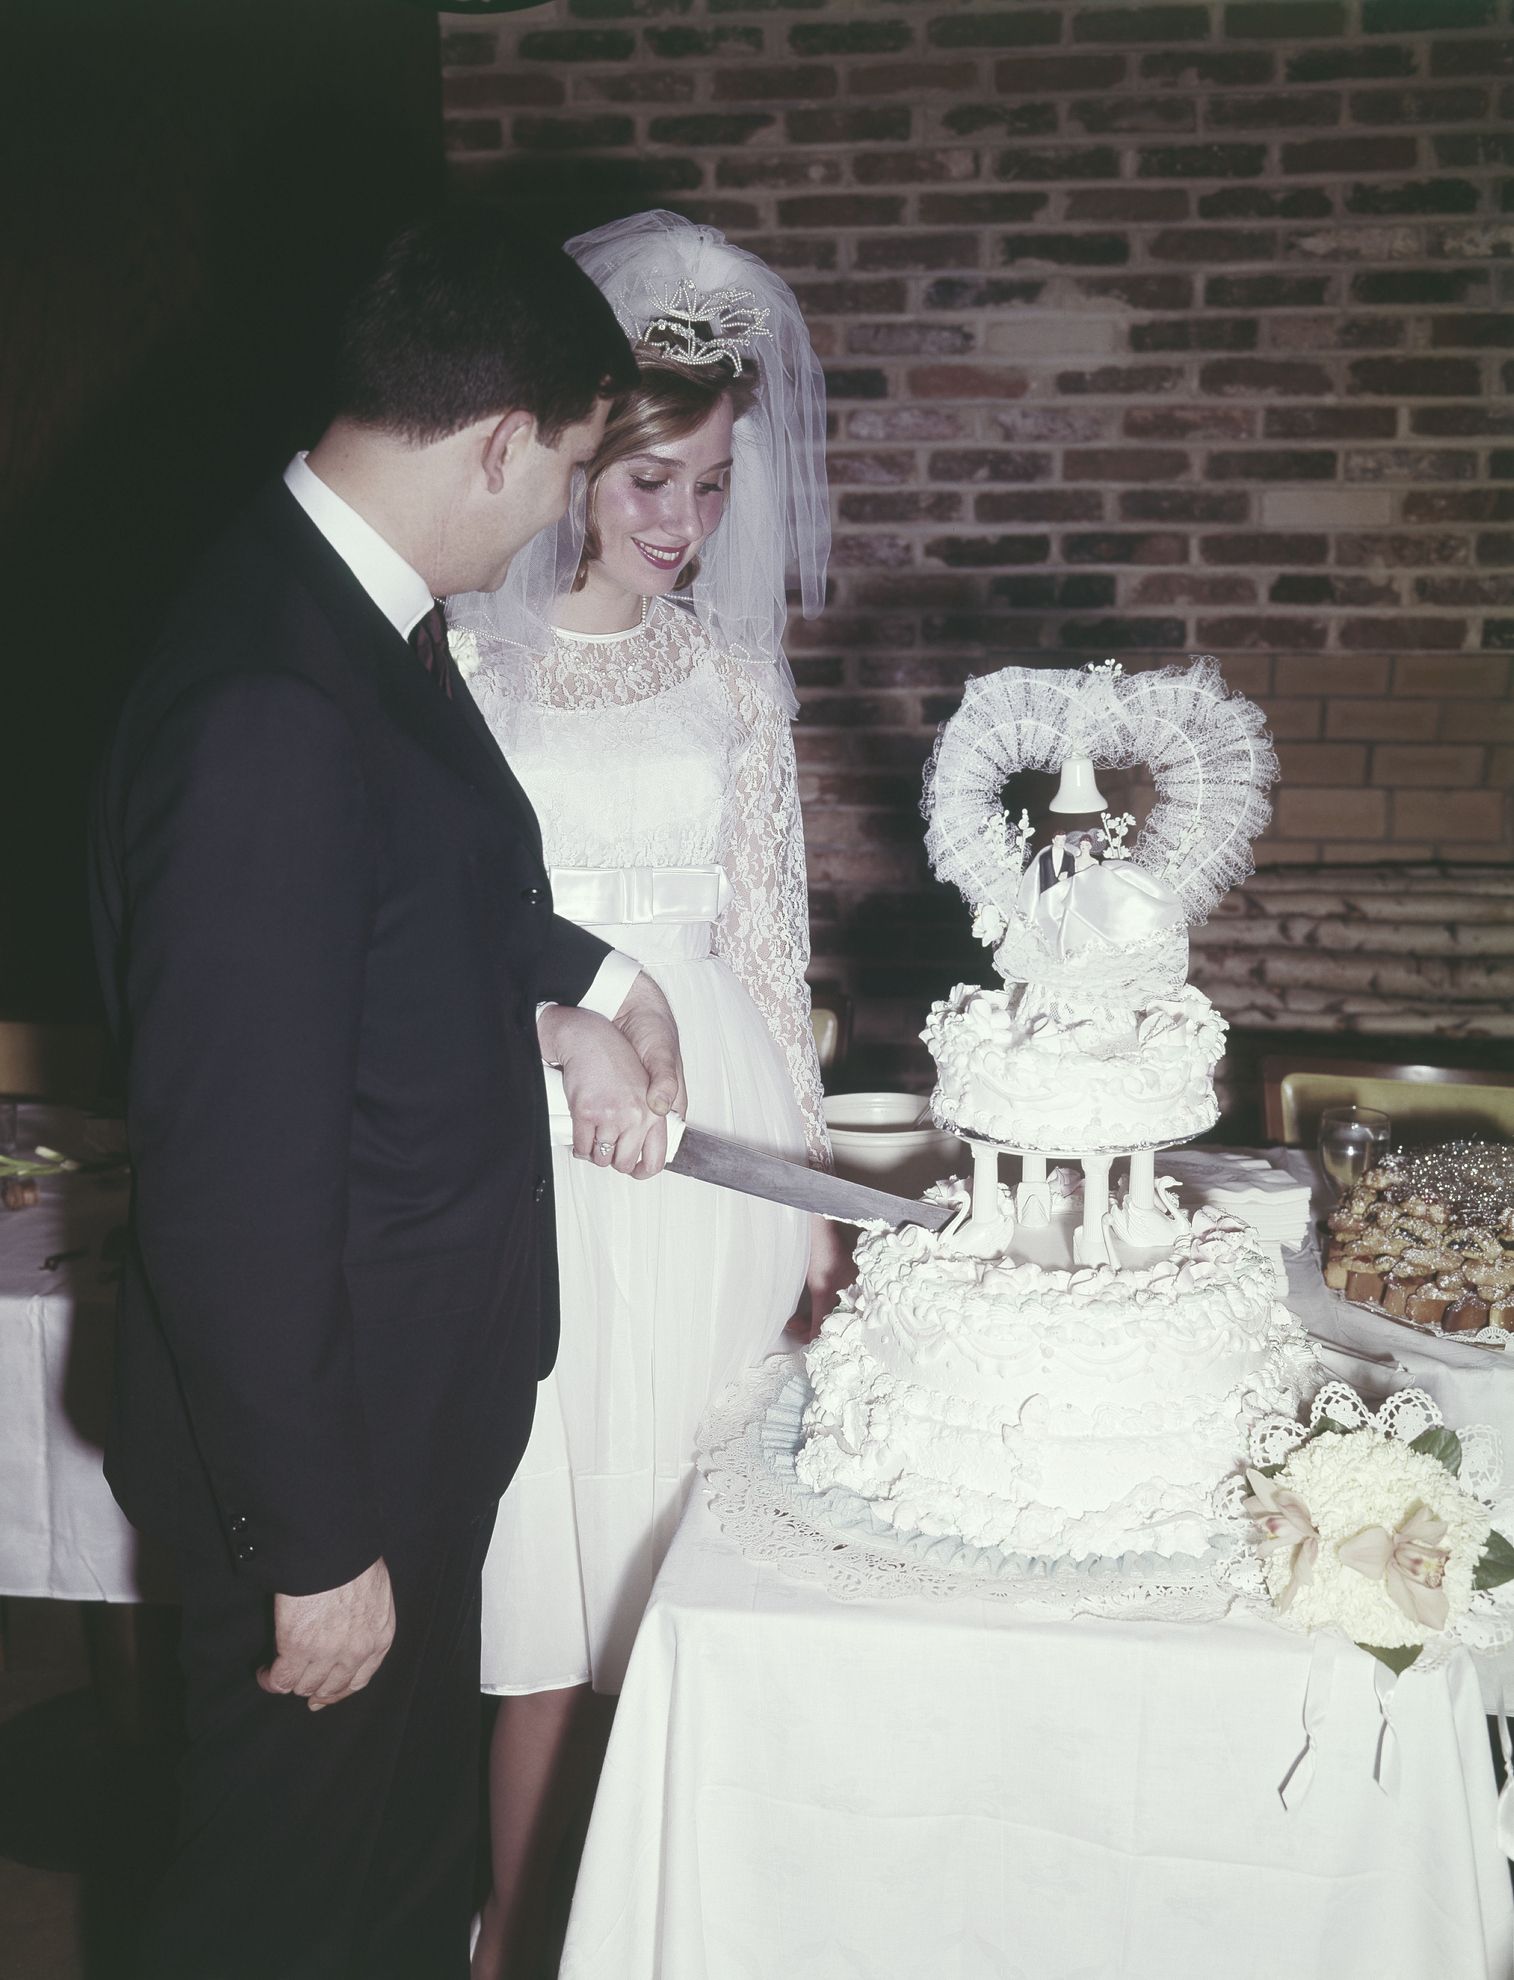 Classic Wedding Traditions That Should Be Brought Back - Vintage